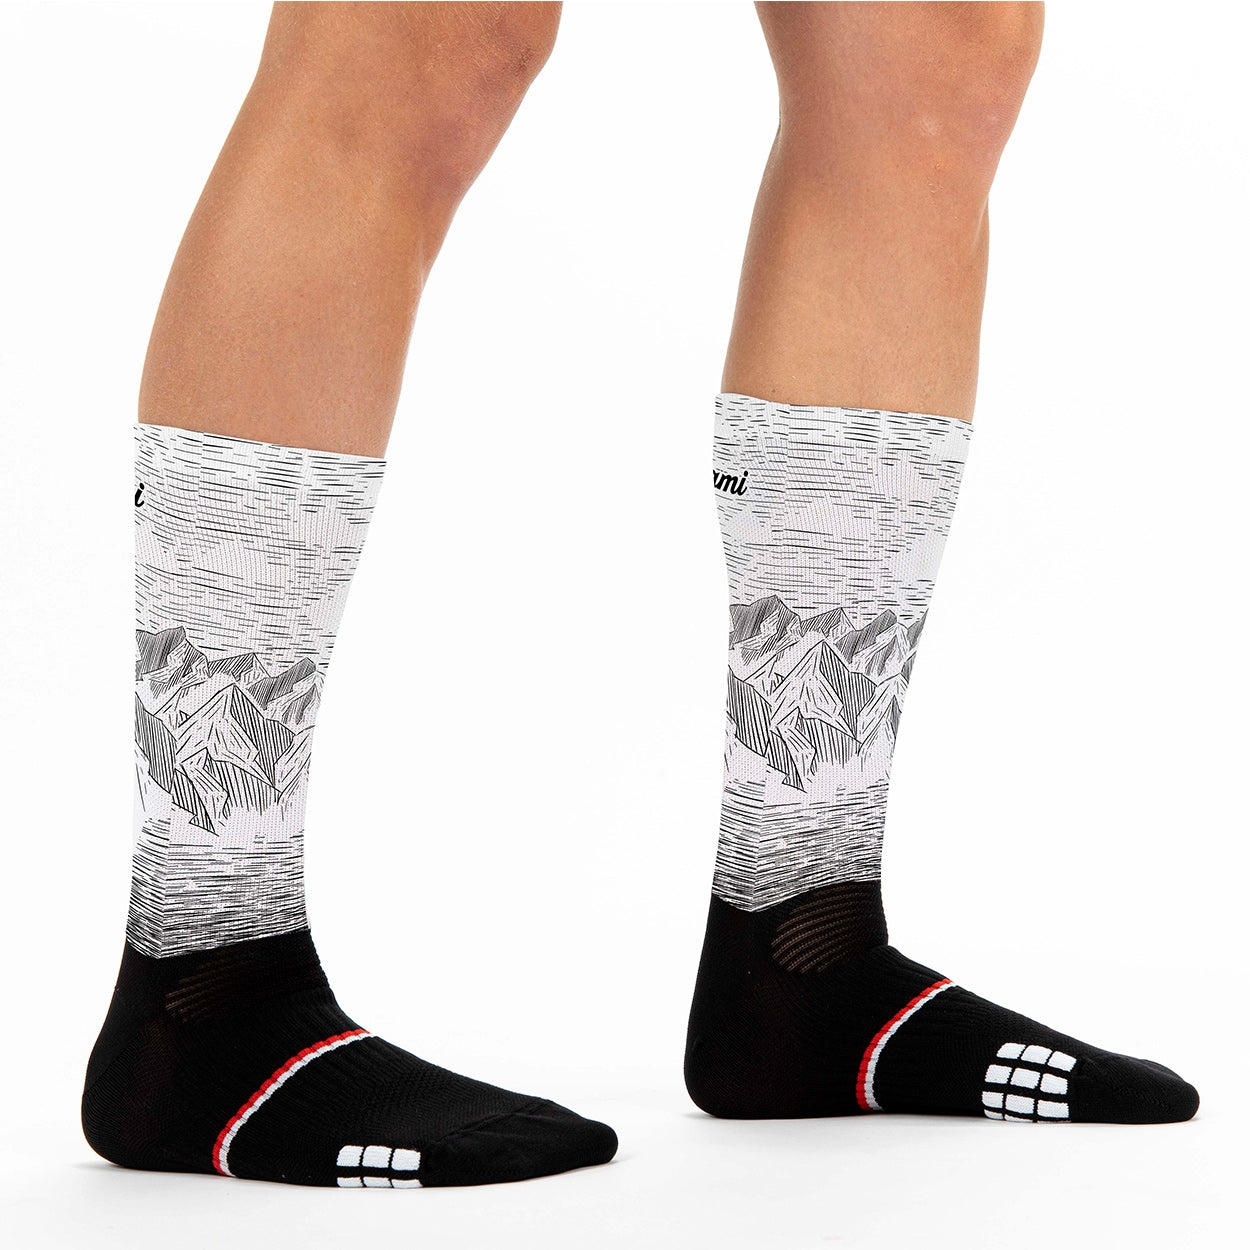 socks_sports_running_cycling_original_colorful_white_moutain_made_in_france_kiwami_sports